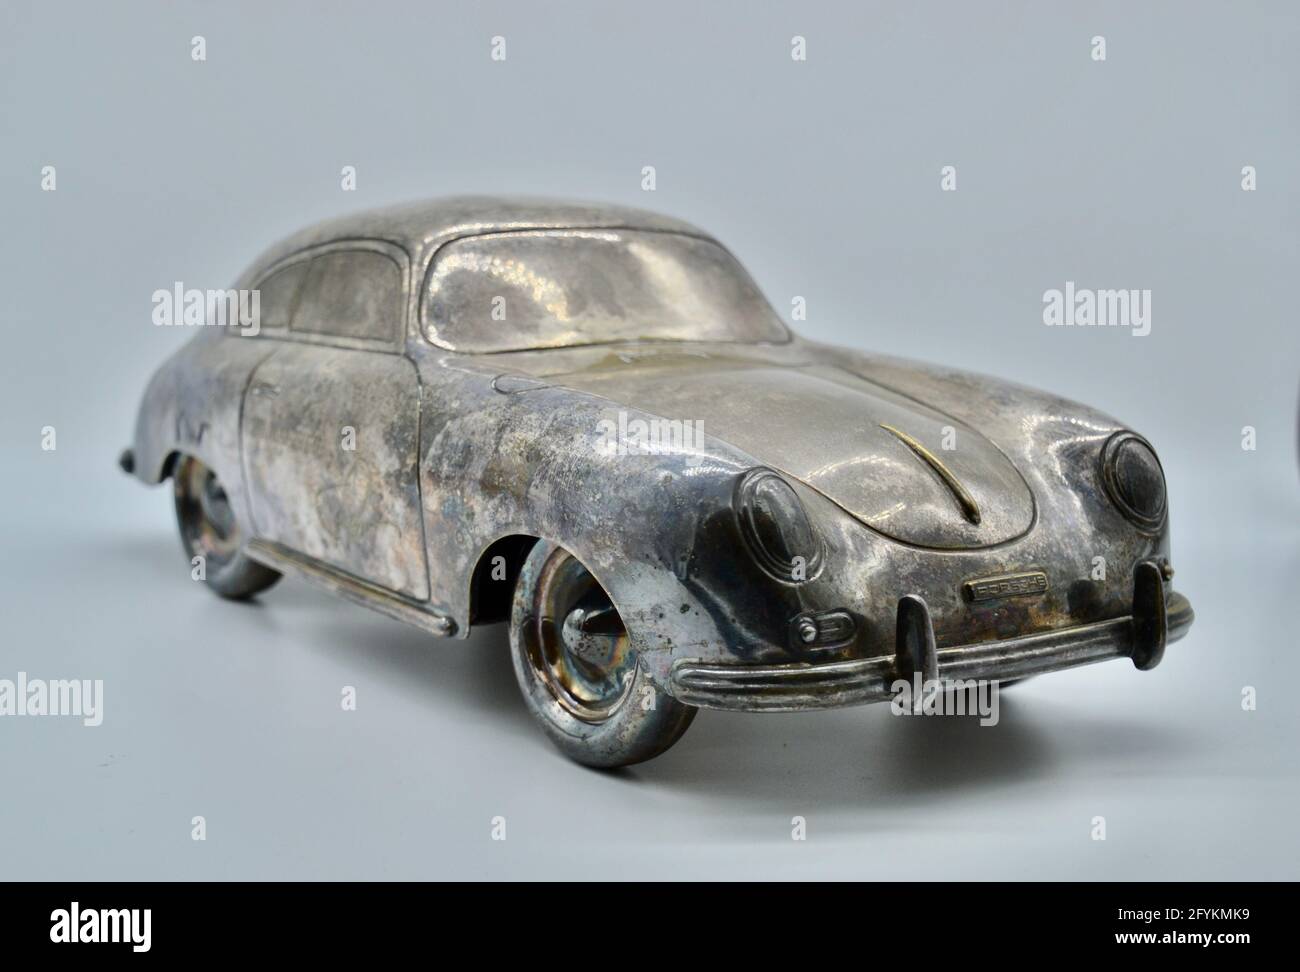 Silver tarnished vintage toy scale model of a Porsche 356 sports car in studio shot on white background Stock Photo